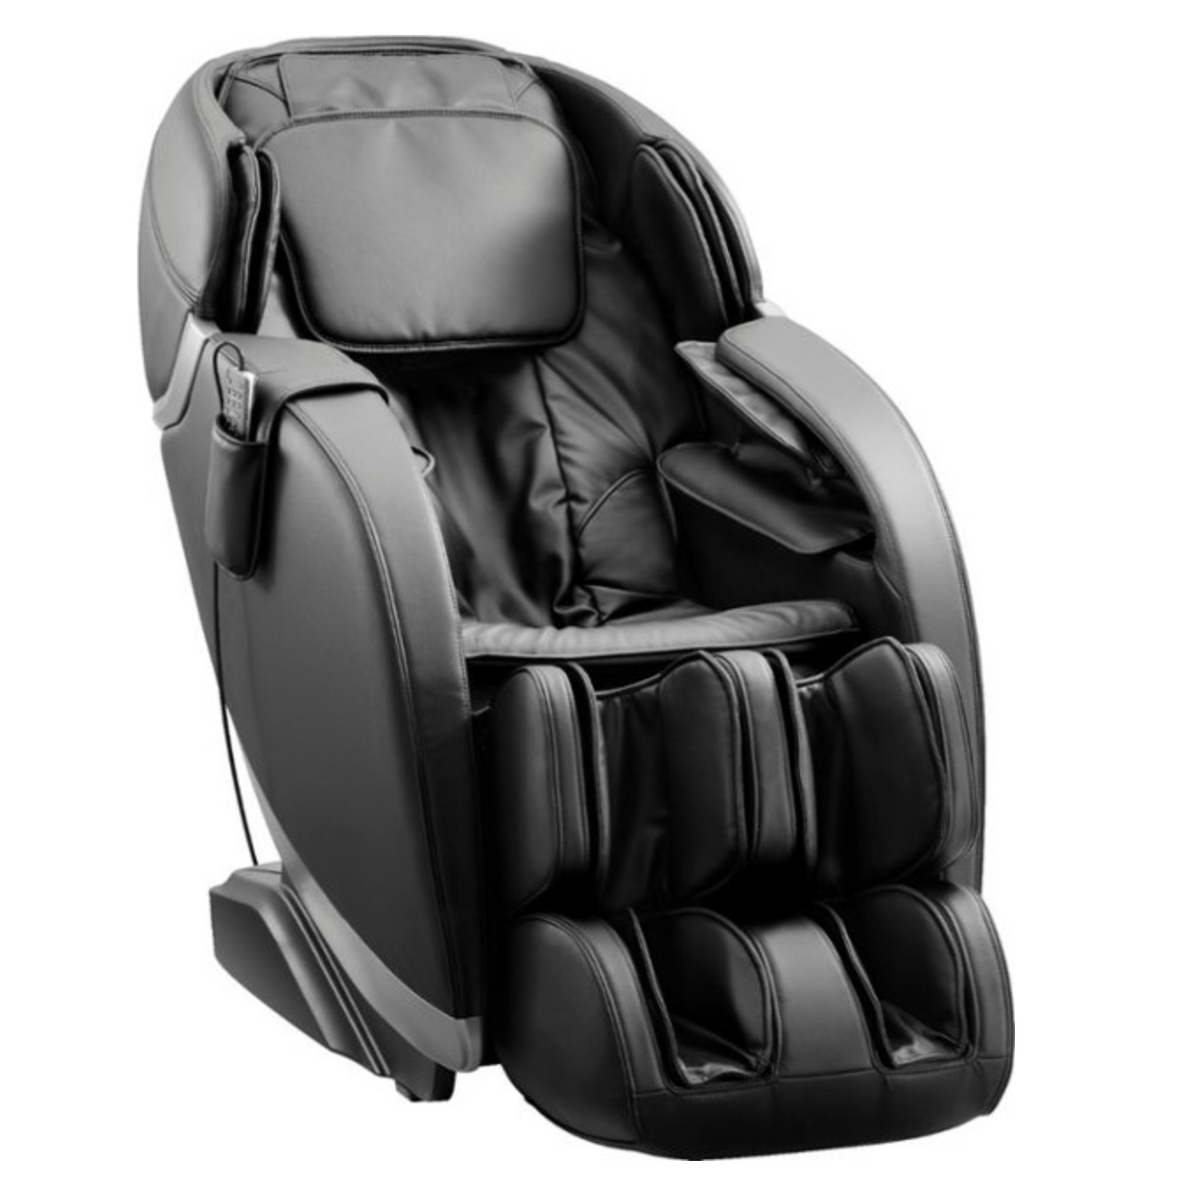 The Best Massage Chairs And Recliners, Leather Recliner Massage Chair